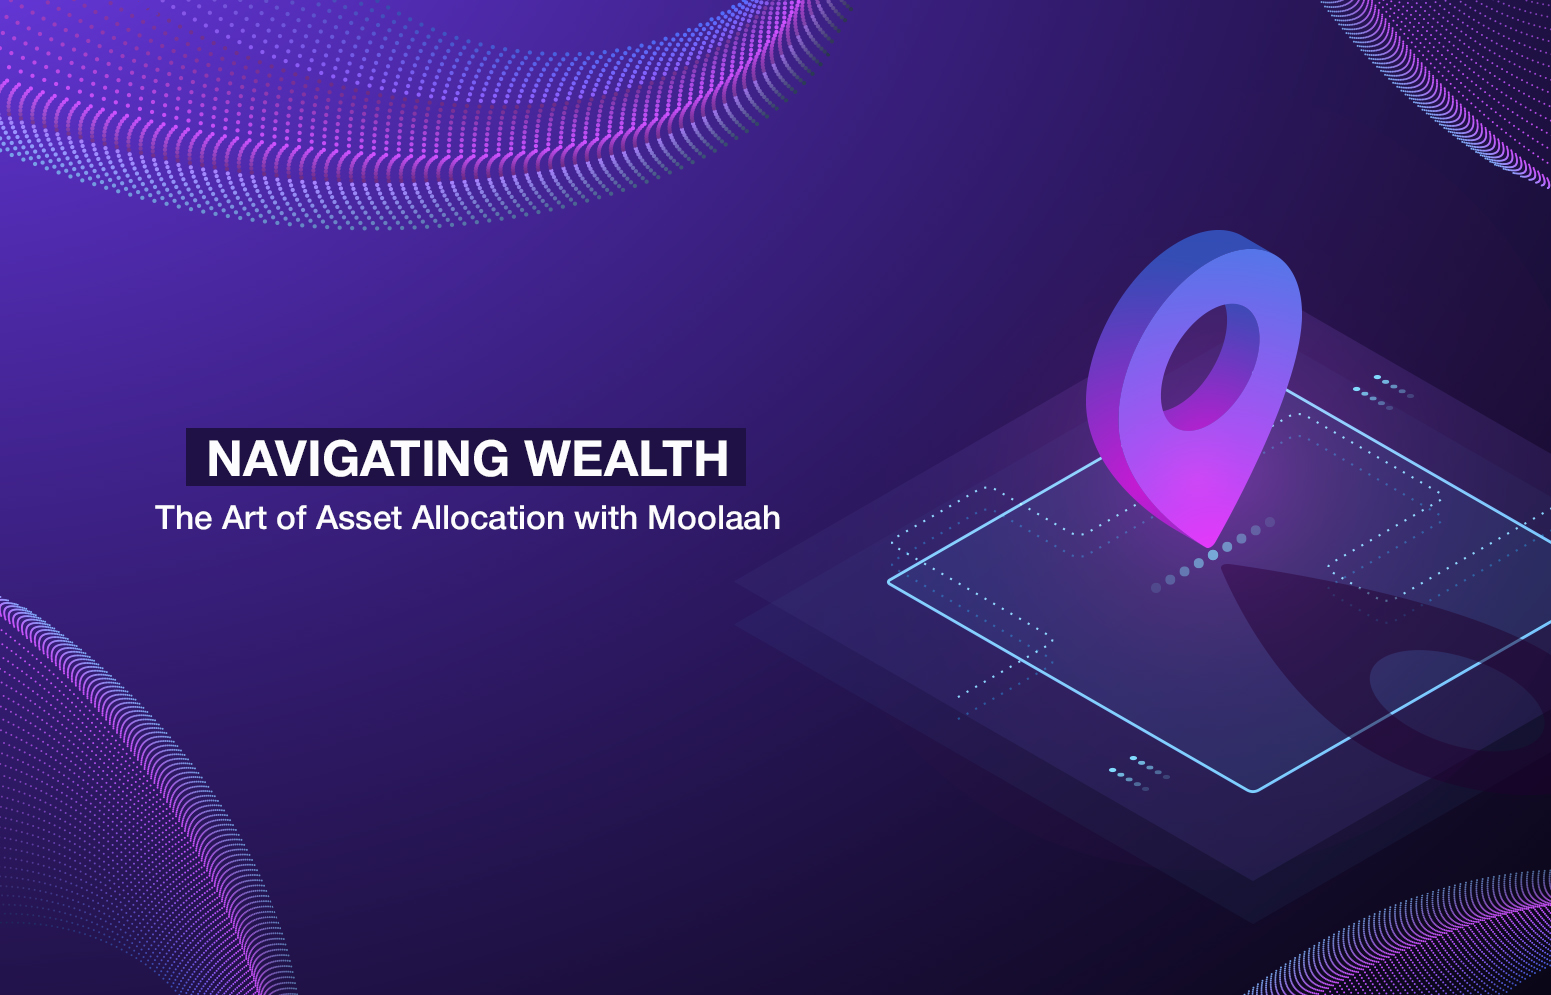 Navigating Wealth: The Art of Asset Allocation with Moolaah